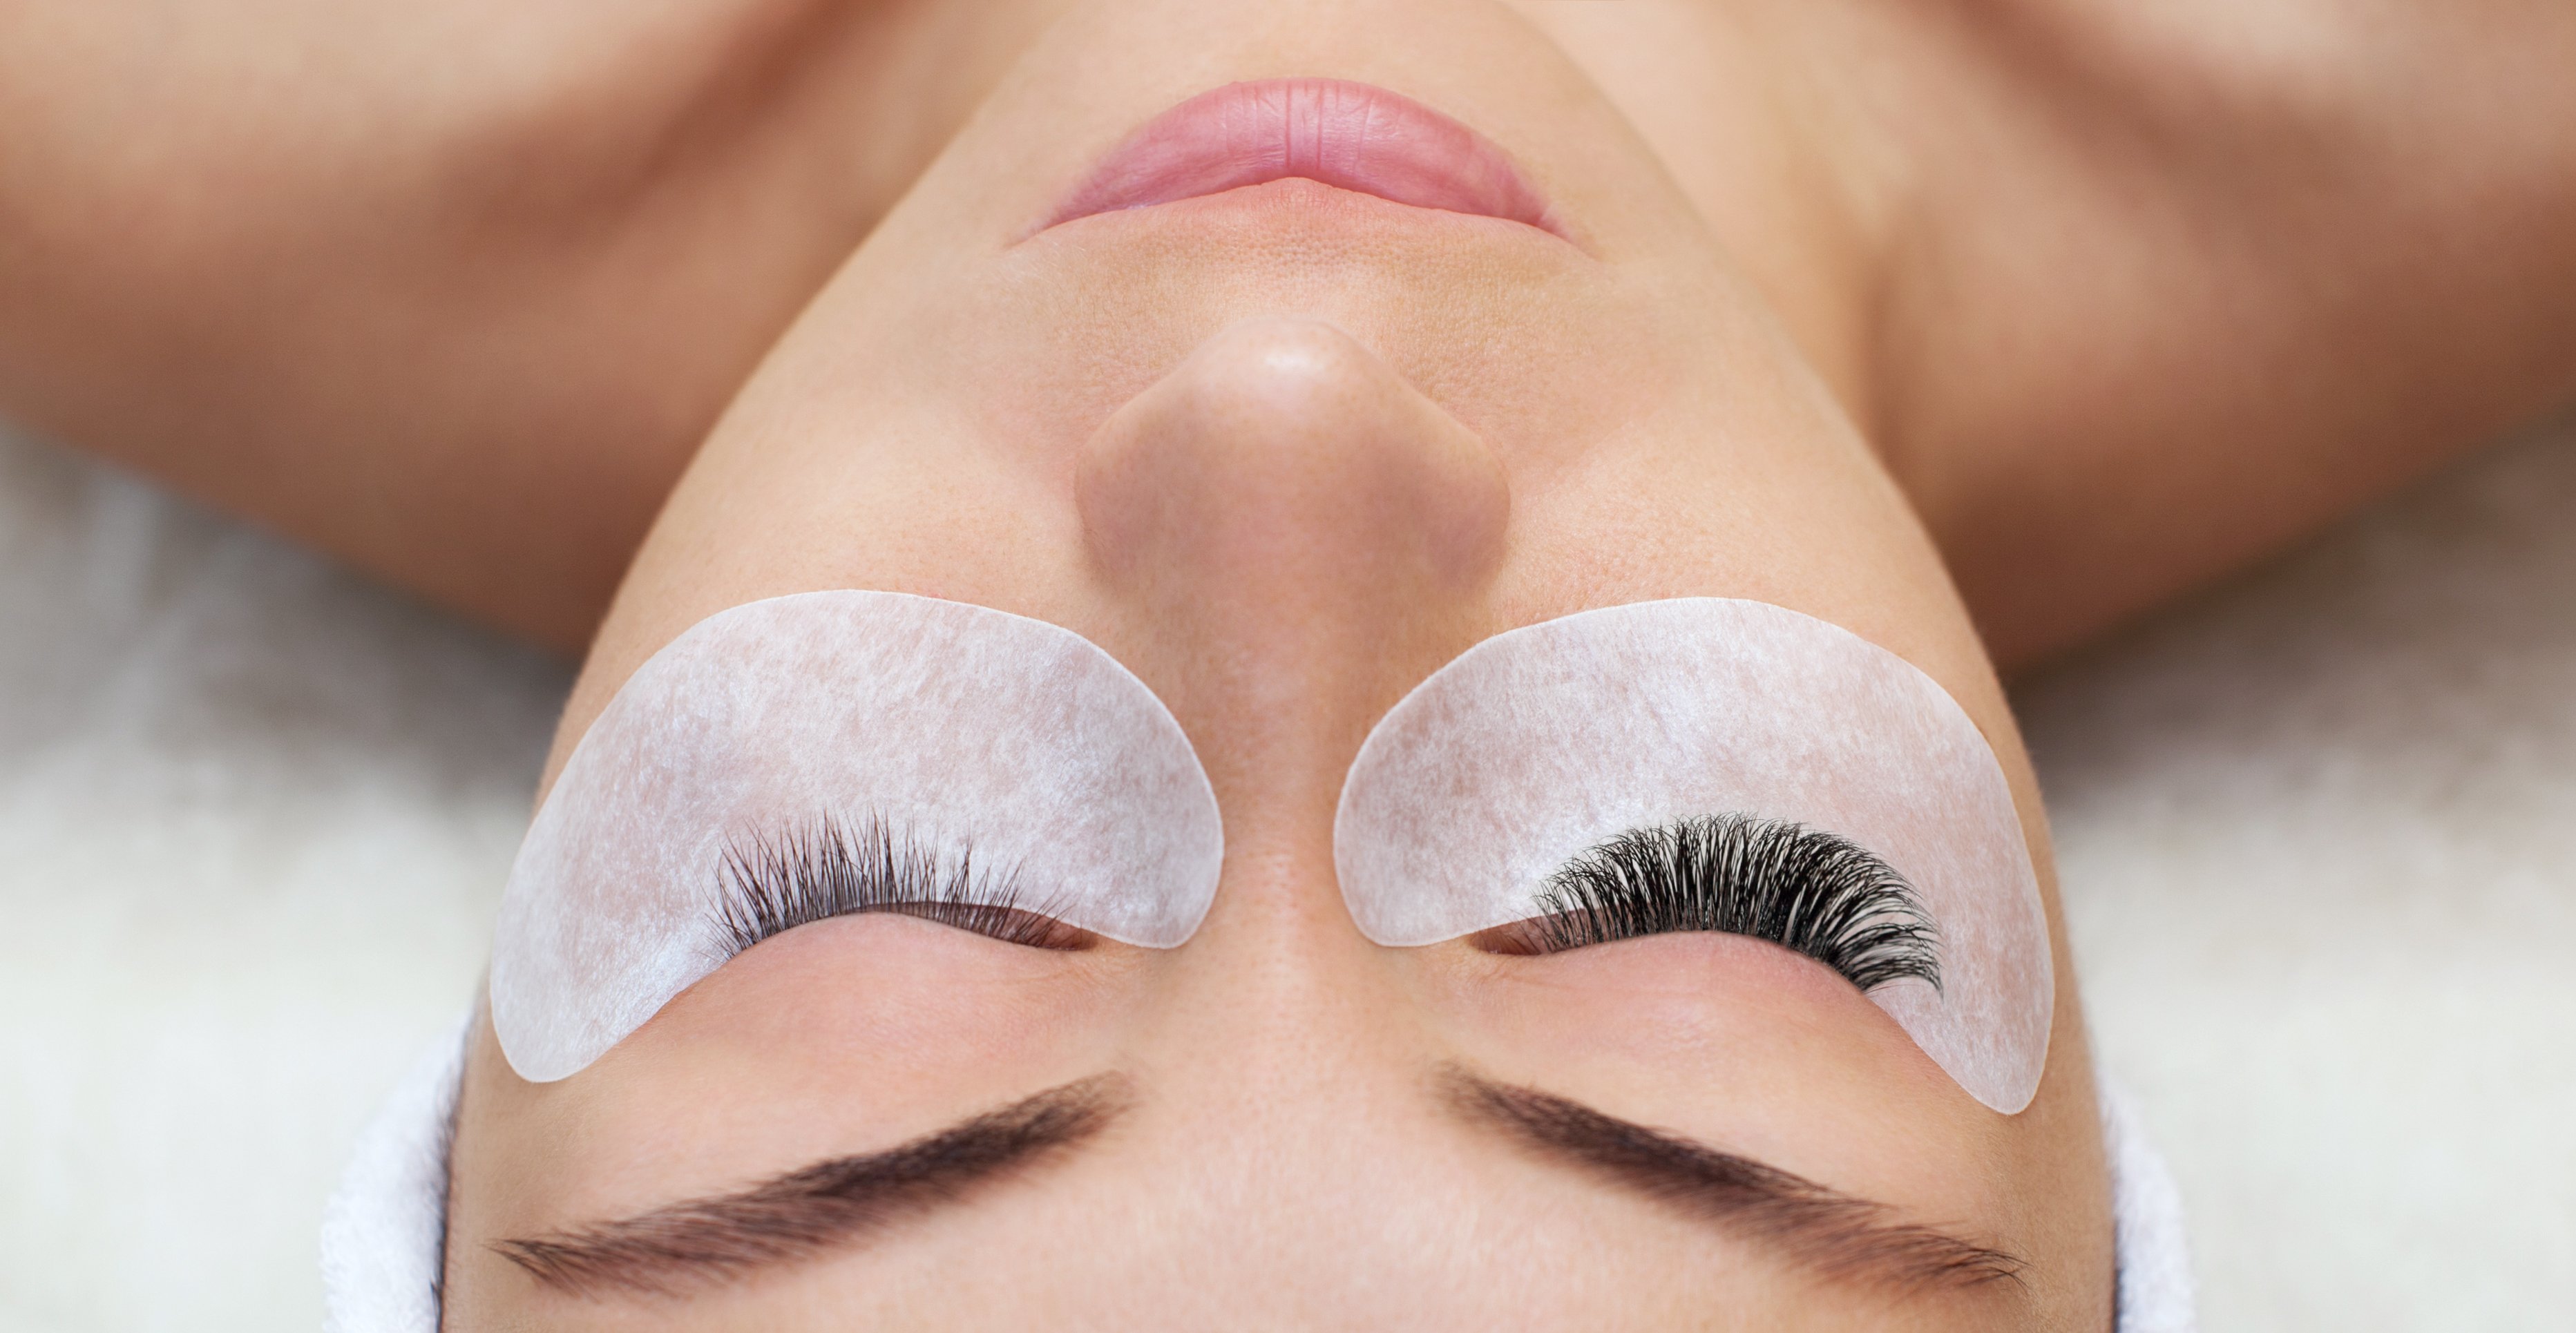 A woman with an eyelash extension on one eye and none on the second eye | Source: Getty Images